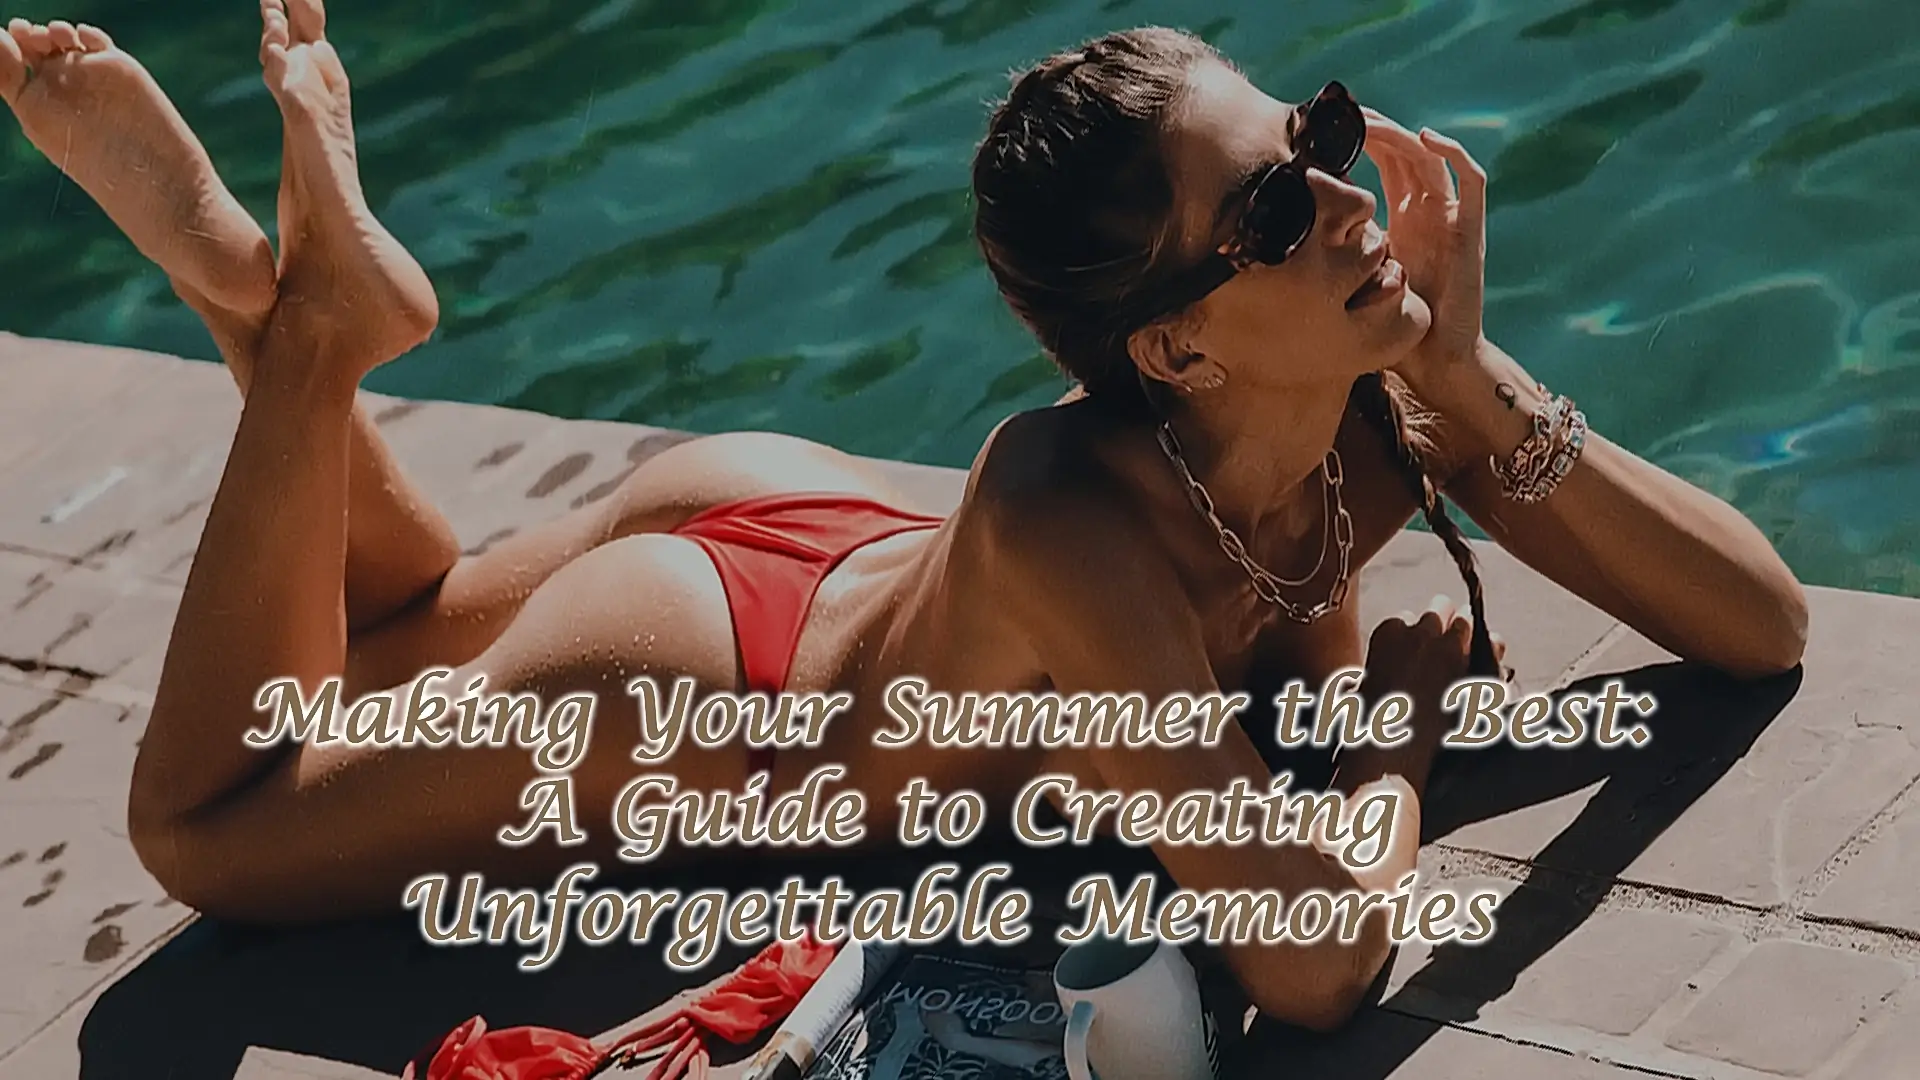 Making Your Summer the Best: A Guide to Creating Unforgettable Memories